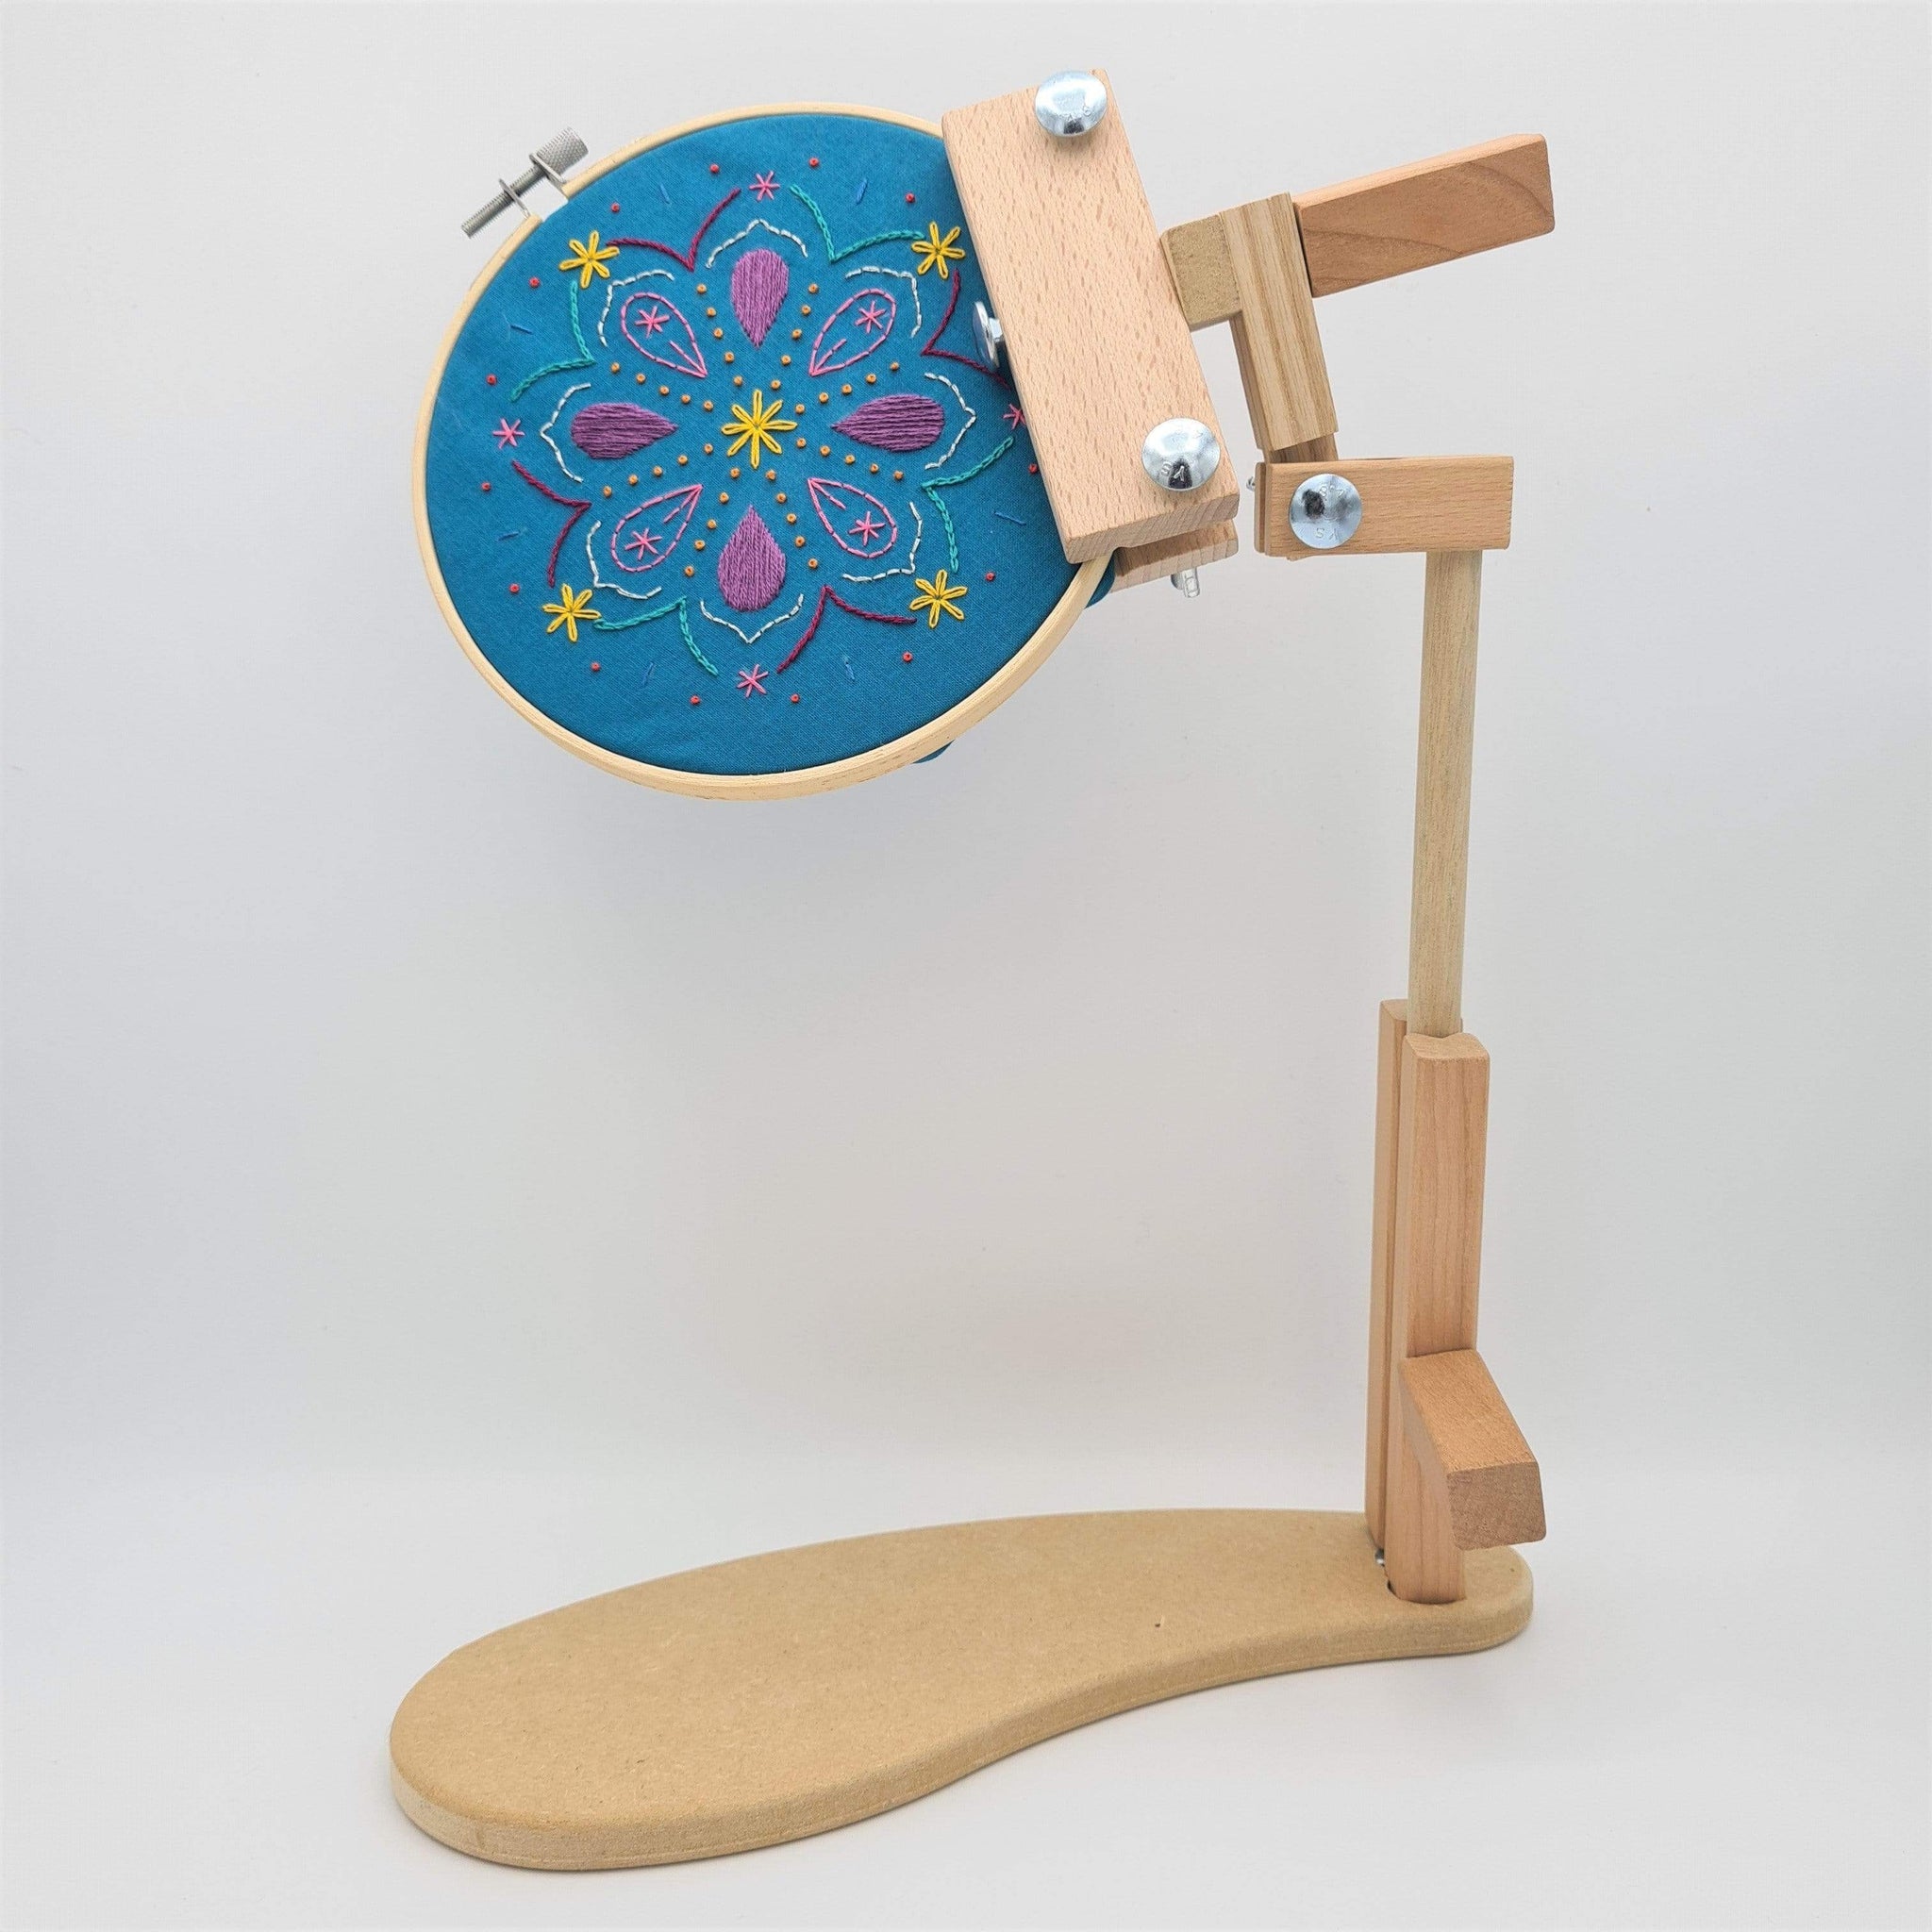 High-Quality Embroidery Hoop Stands